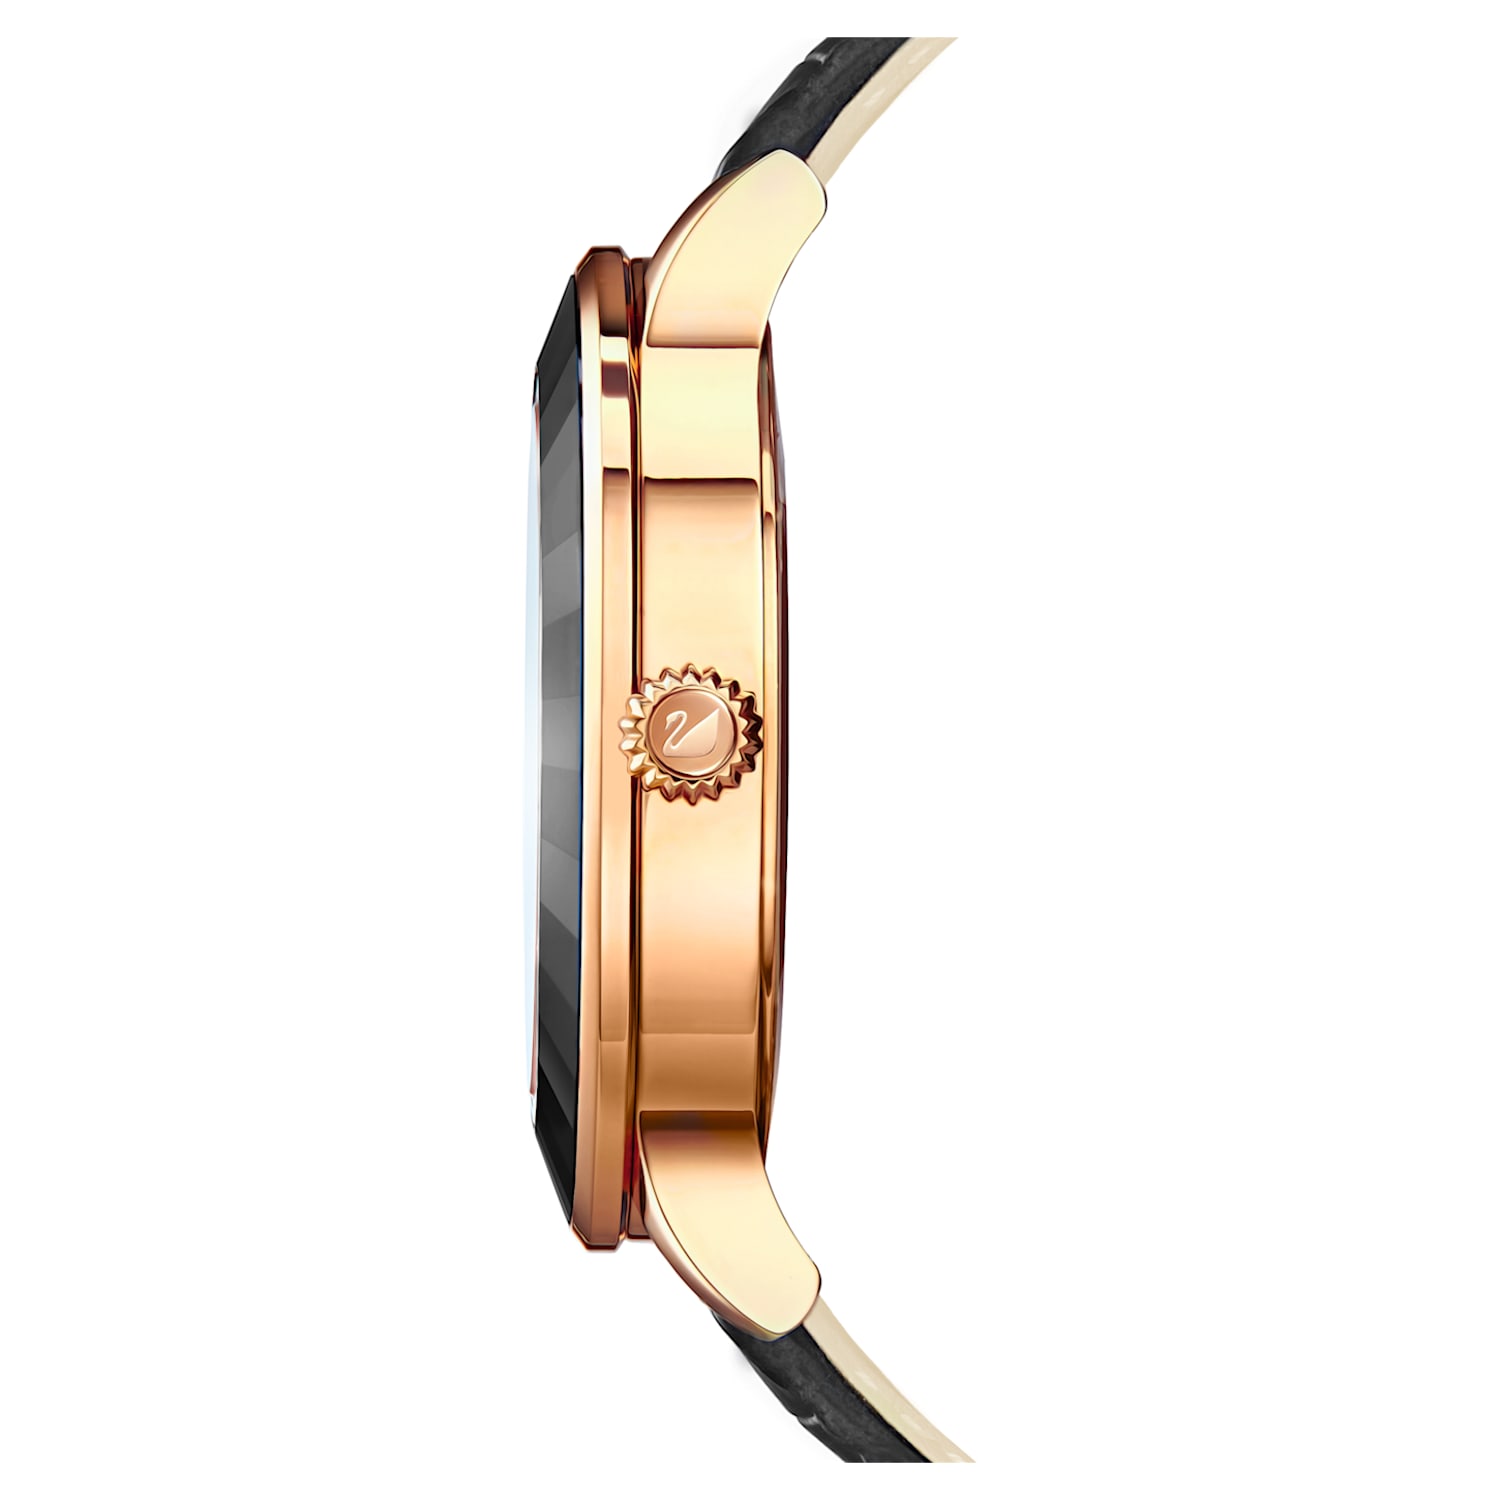 Octea Lux watch, Leather strap, Black, Rose gold-tone finish 